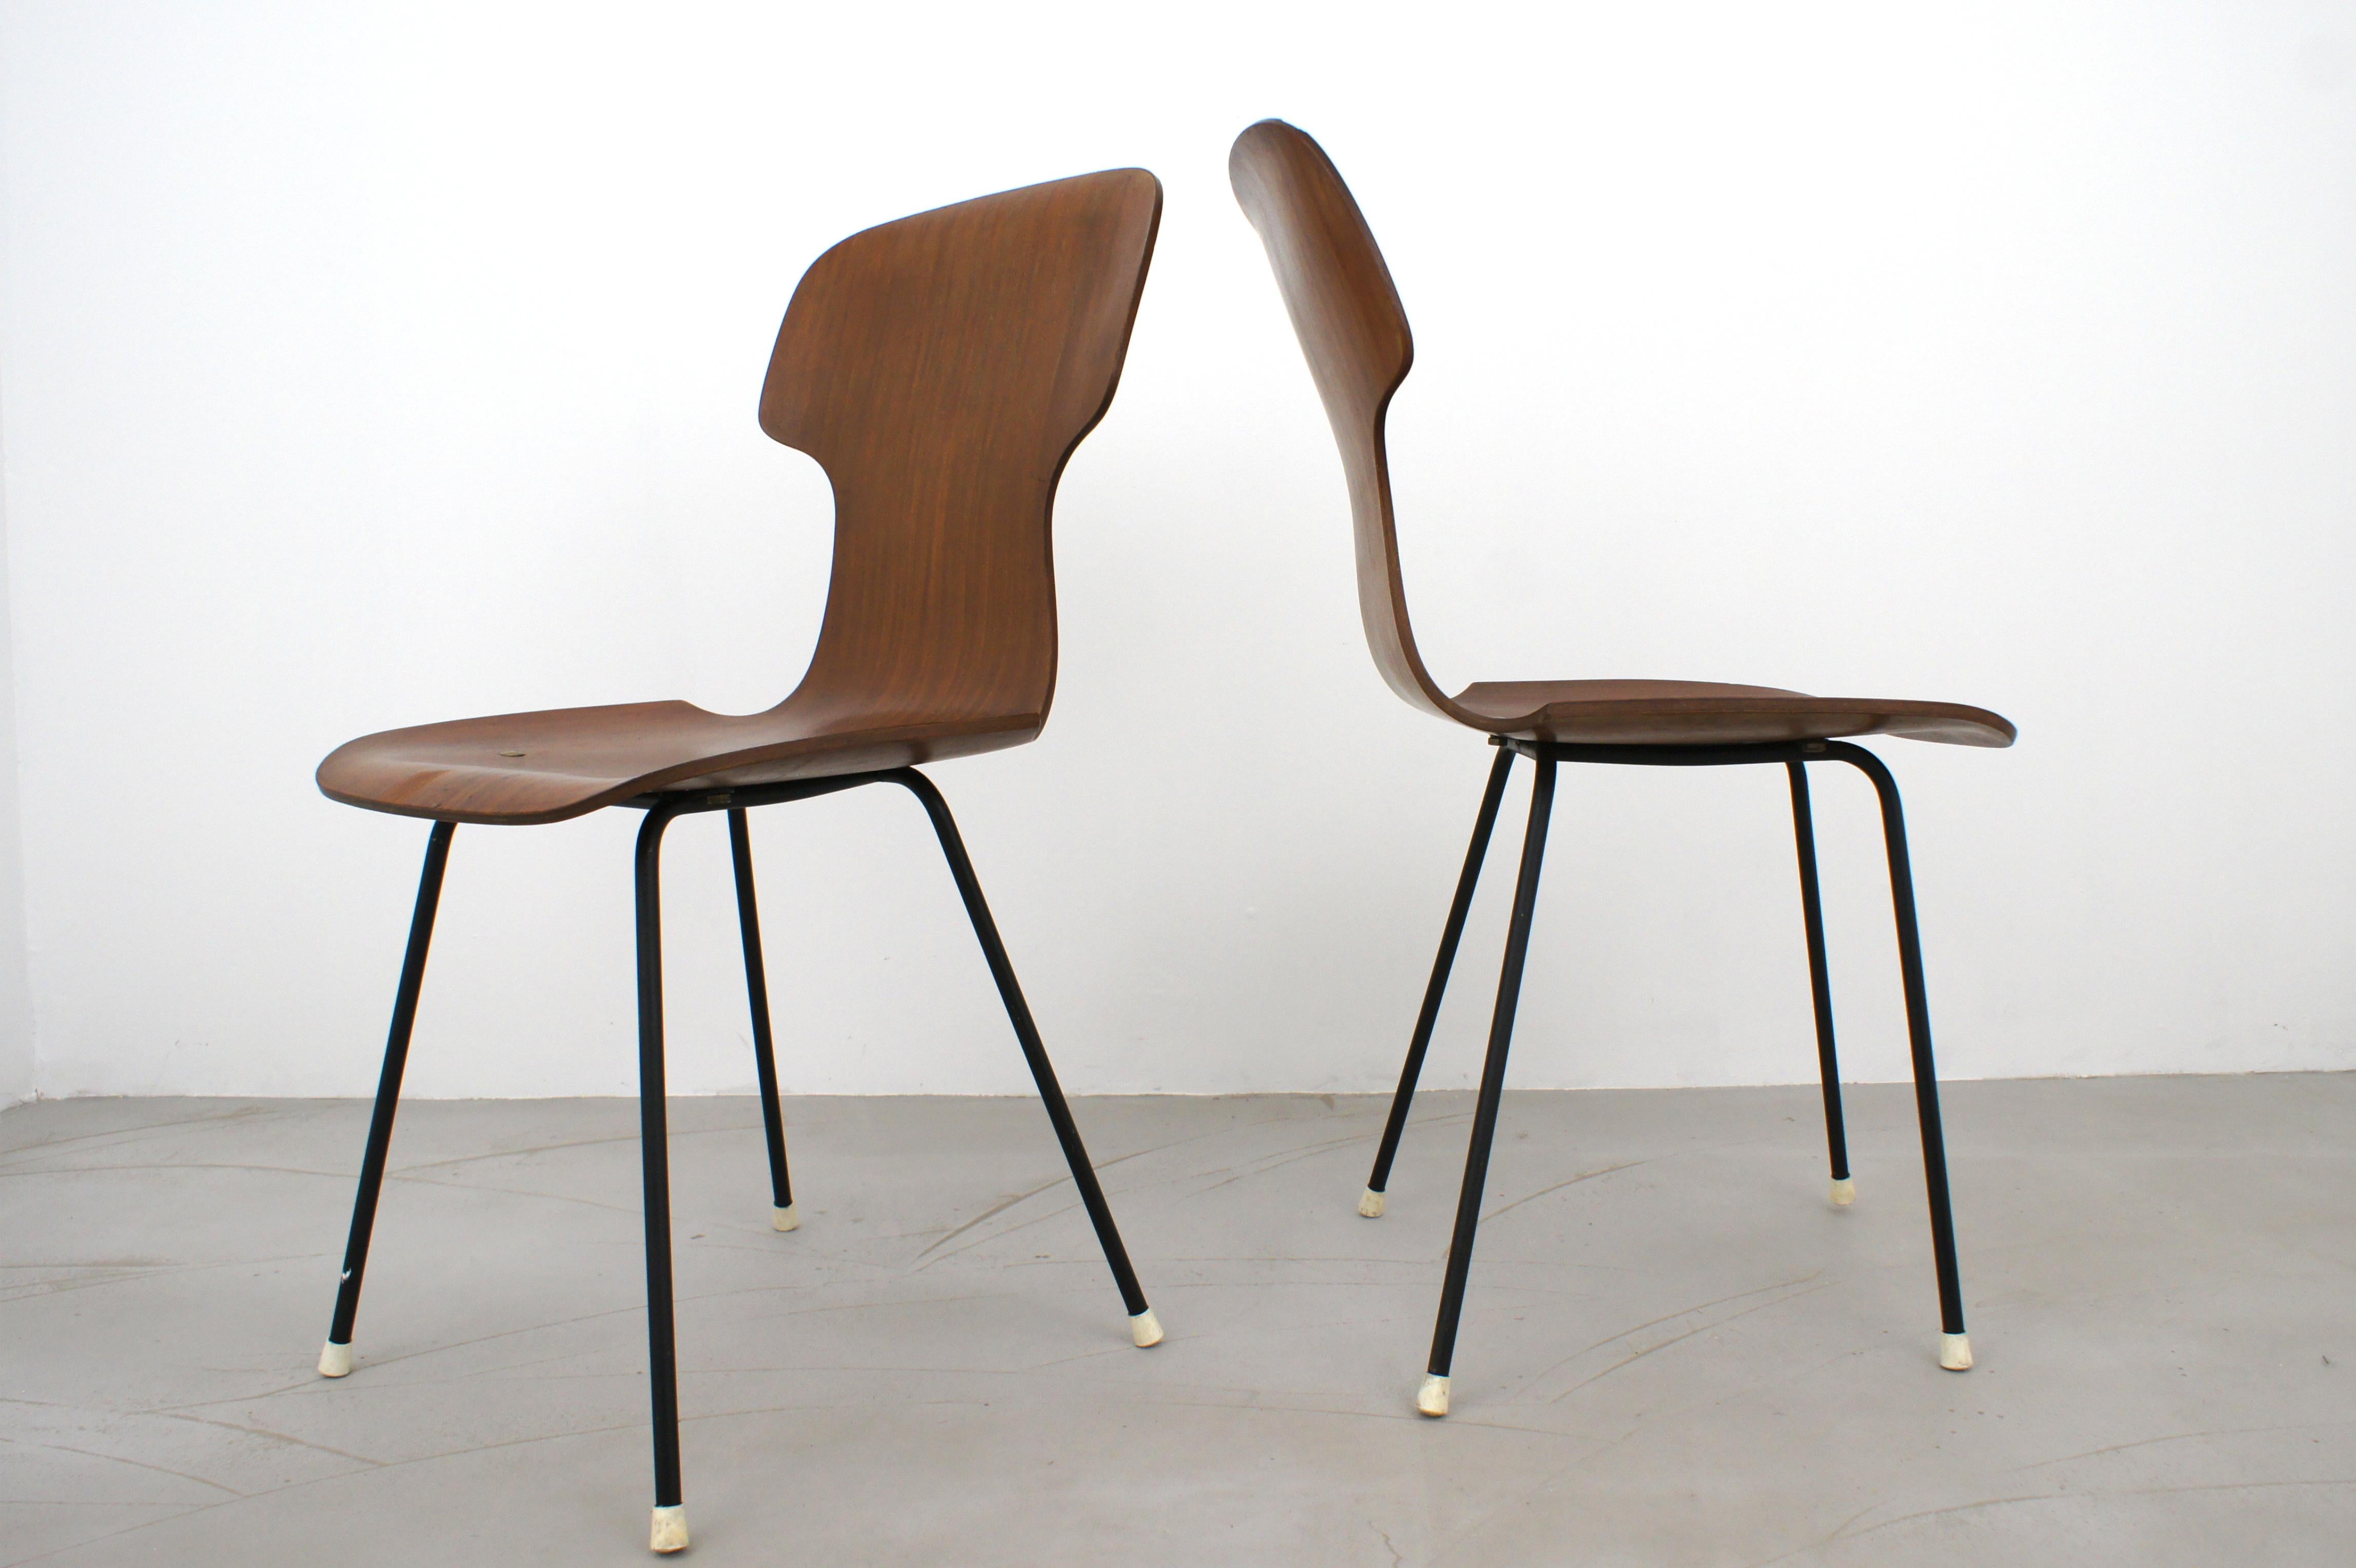 Set of 4 dining chairs made of curved plywood, Italian production from the 1960s.

The seat is a steam-curved wood monocoque, light and elastic but strong, secured to the underlying black lacquered metal frame by brass elements.

The chairs can be